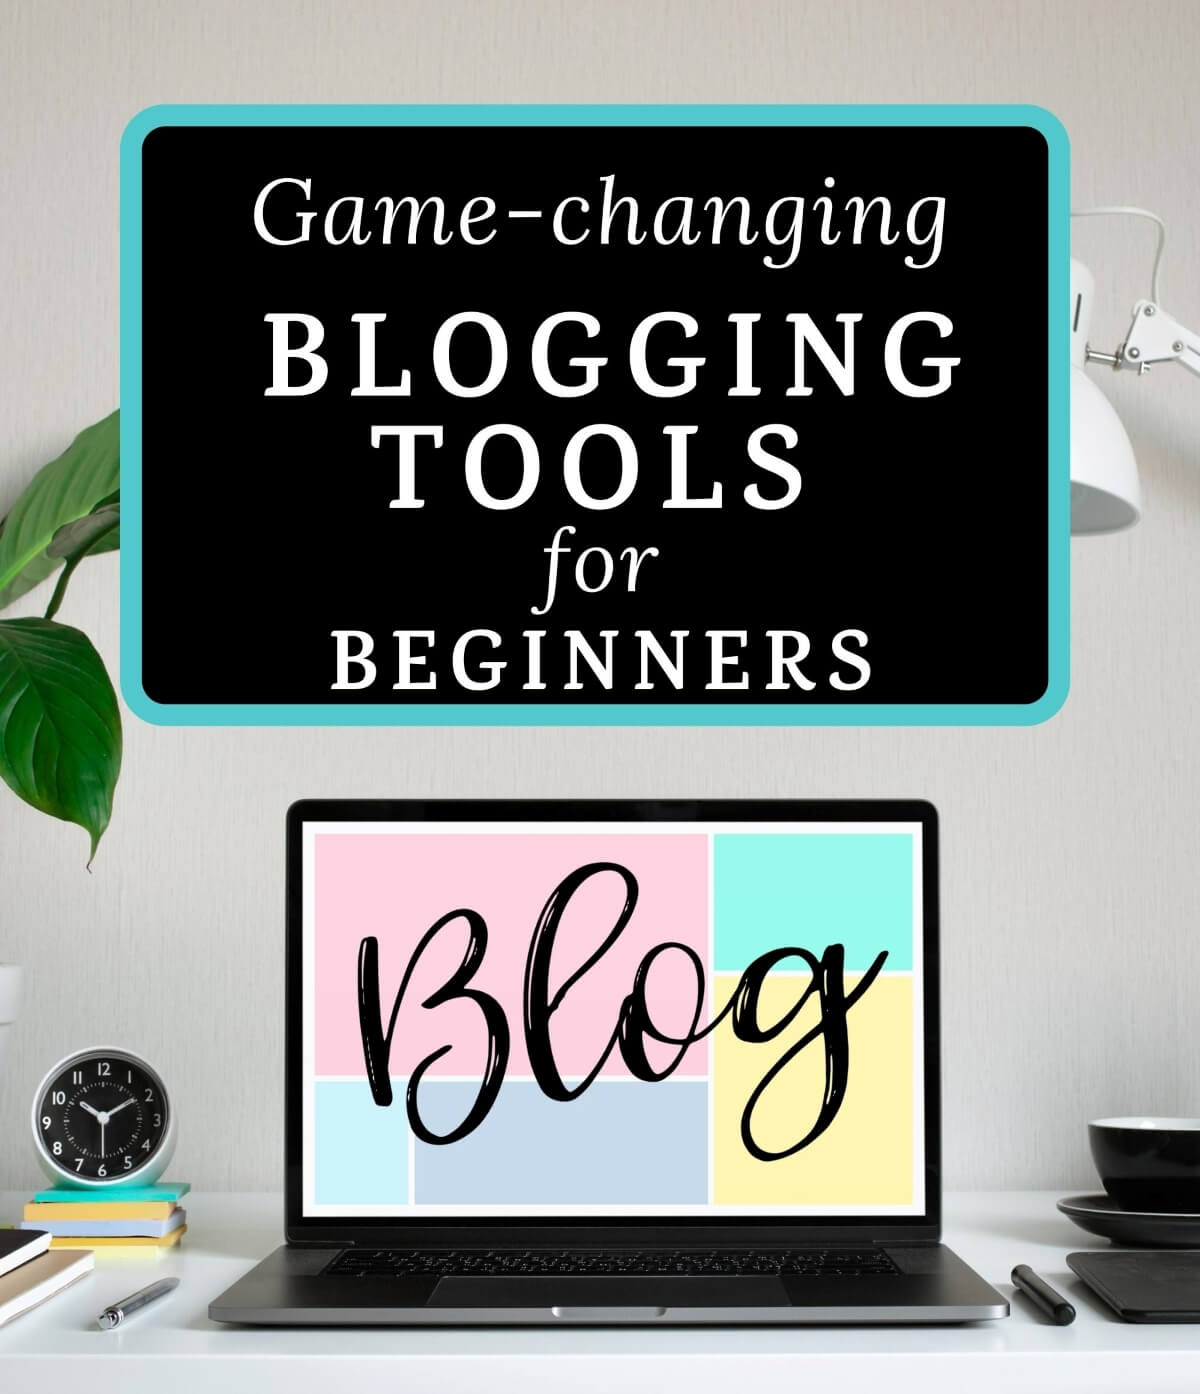 an image of a laptop with a colorful screen that says "blog" in cursive text.  Also the text "game-changing blogging tools for beginners"